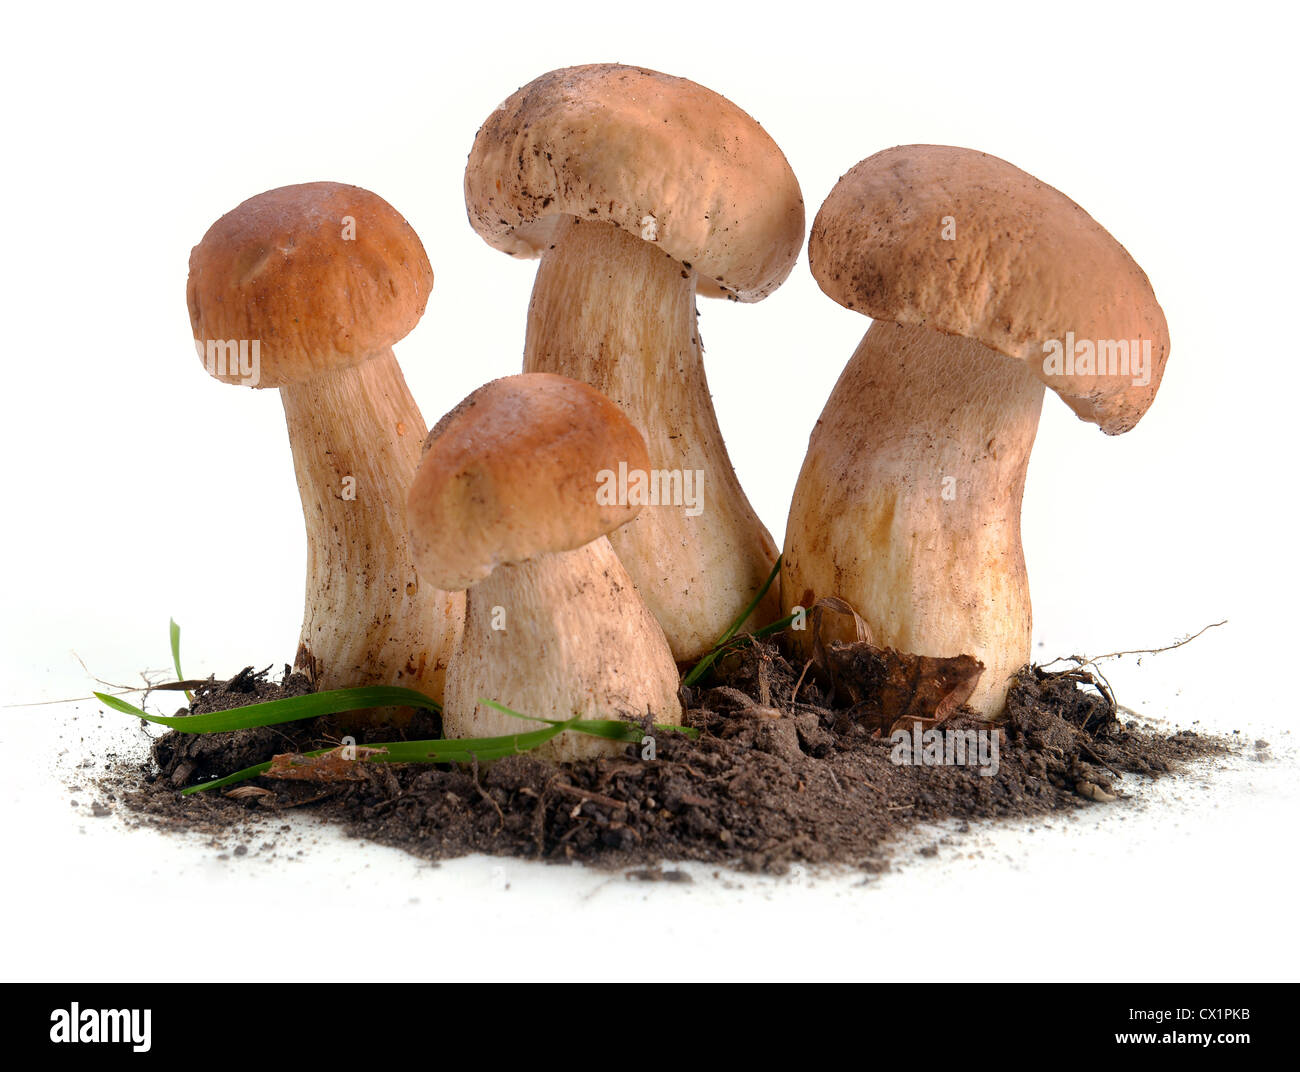 ceps mushrooms in the ground on a white background Stock Photo